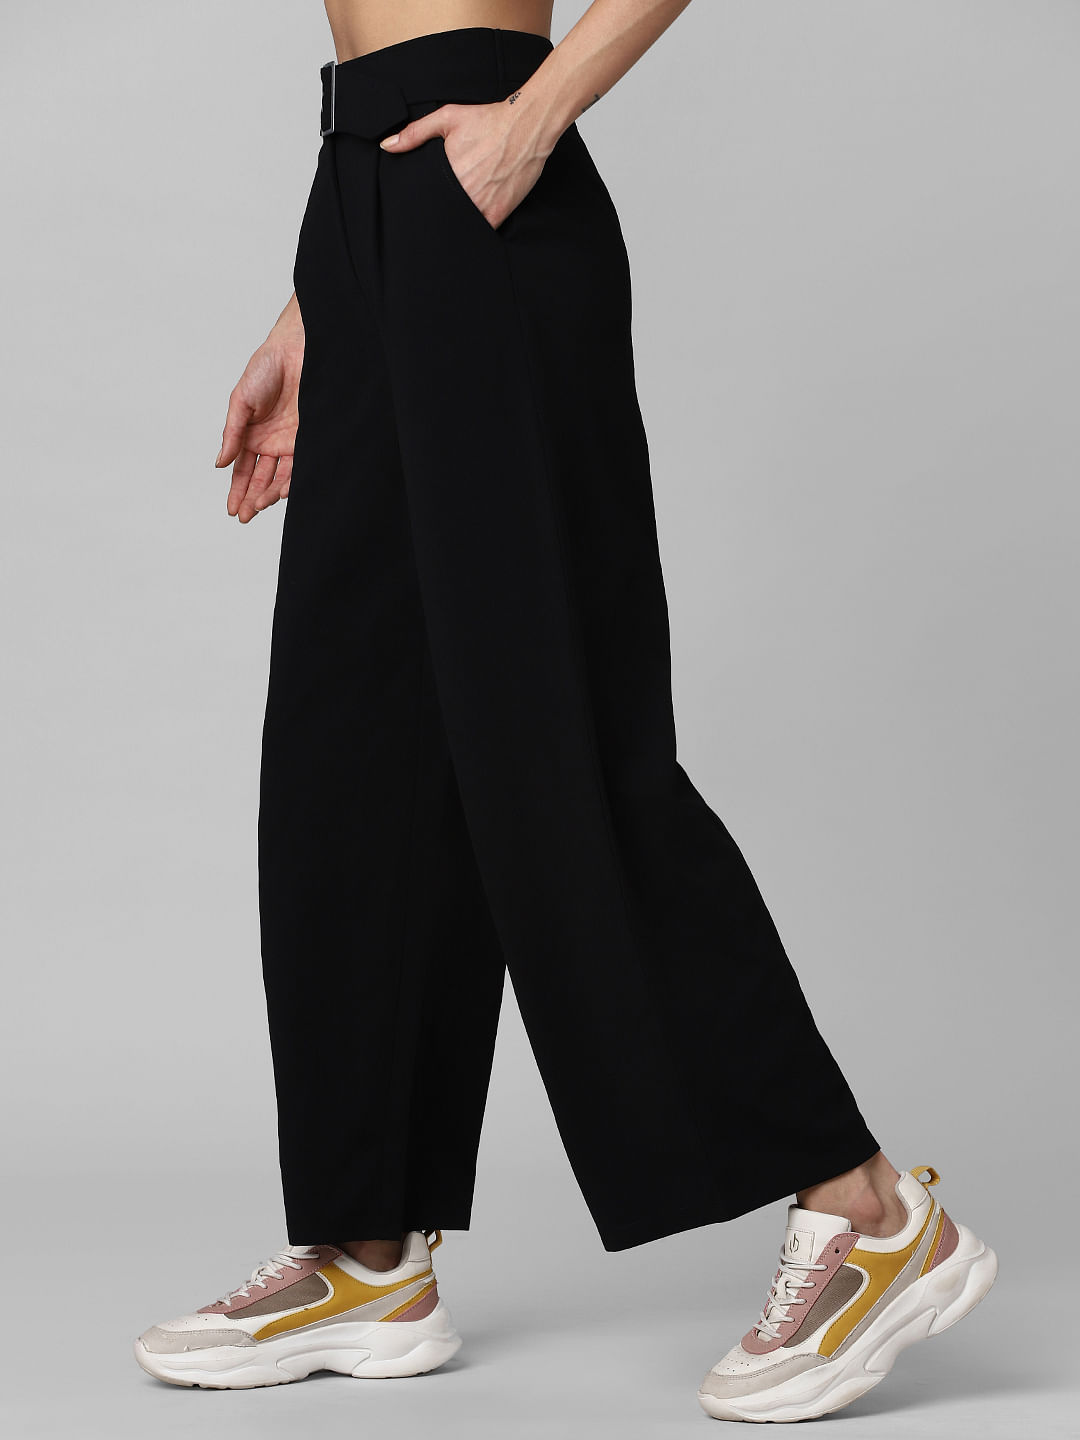 Black Satin Sequin Embellished Wide Leg Trousers | New Look